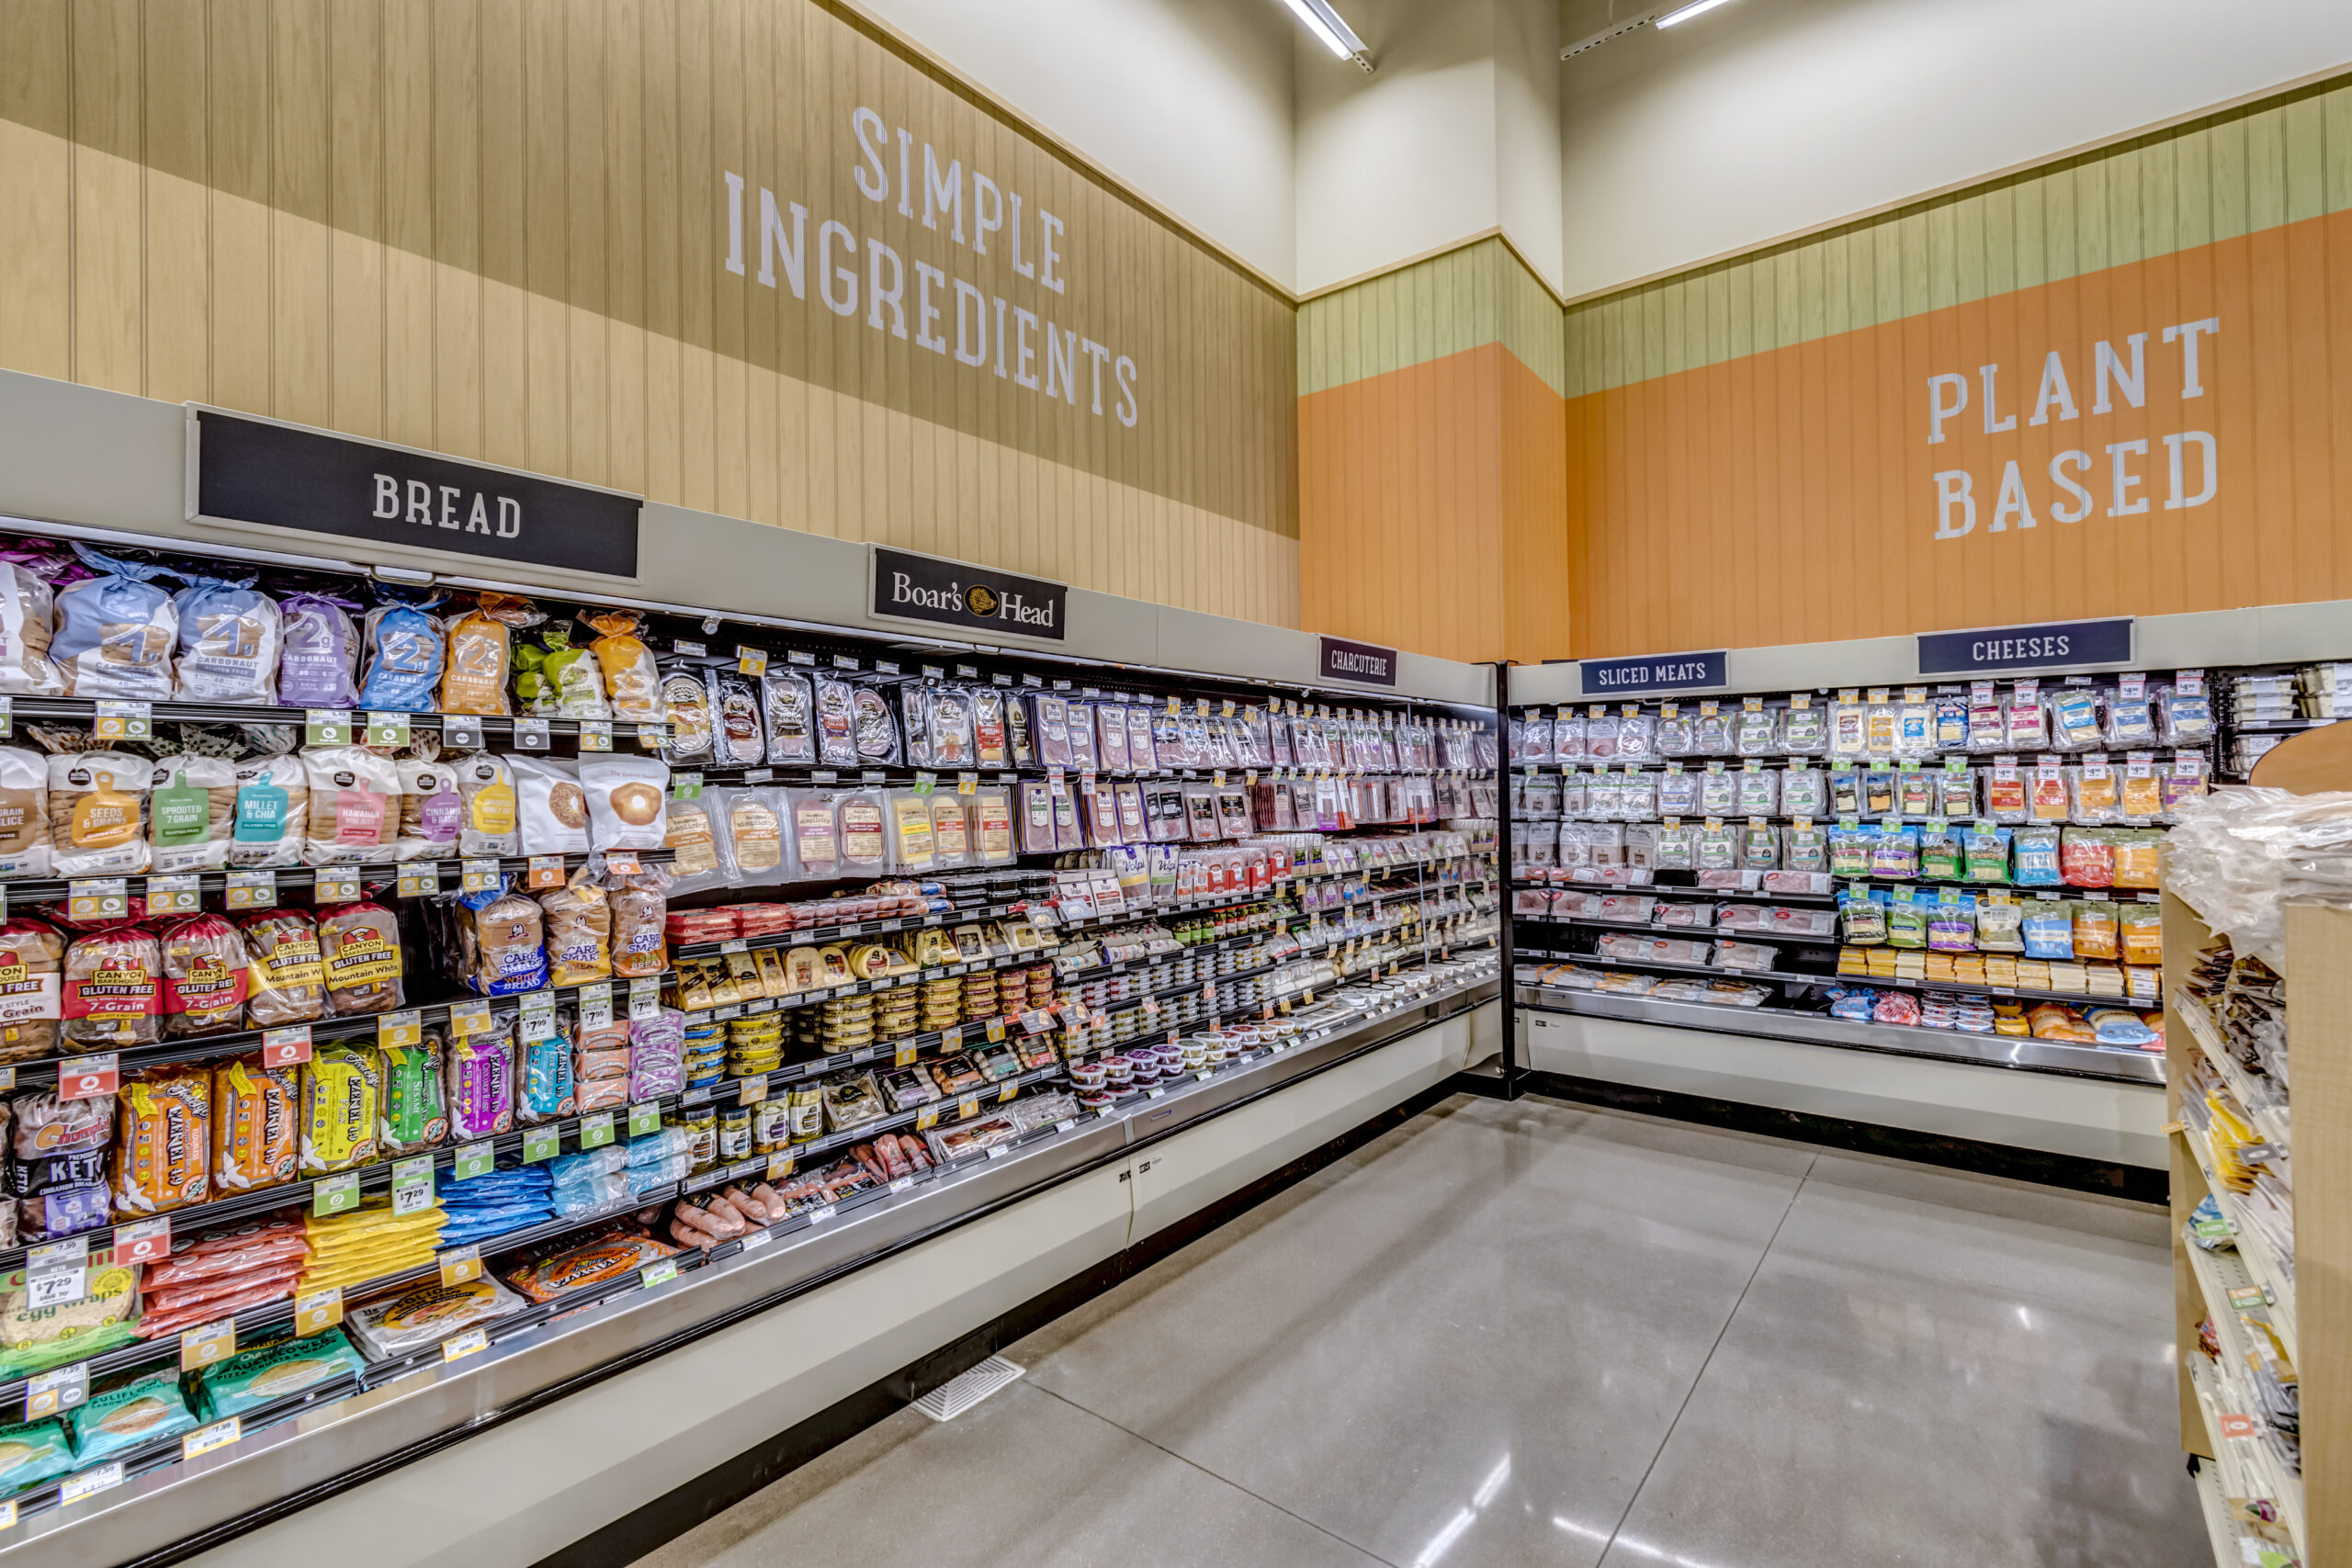 A well lit aisle in Sprouts Farmers Market displaying simple-ingredient and plant-based foods.